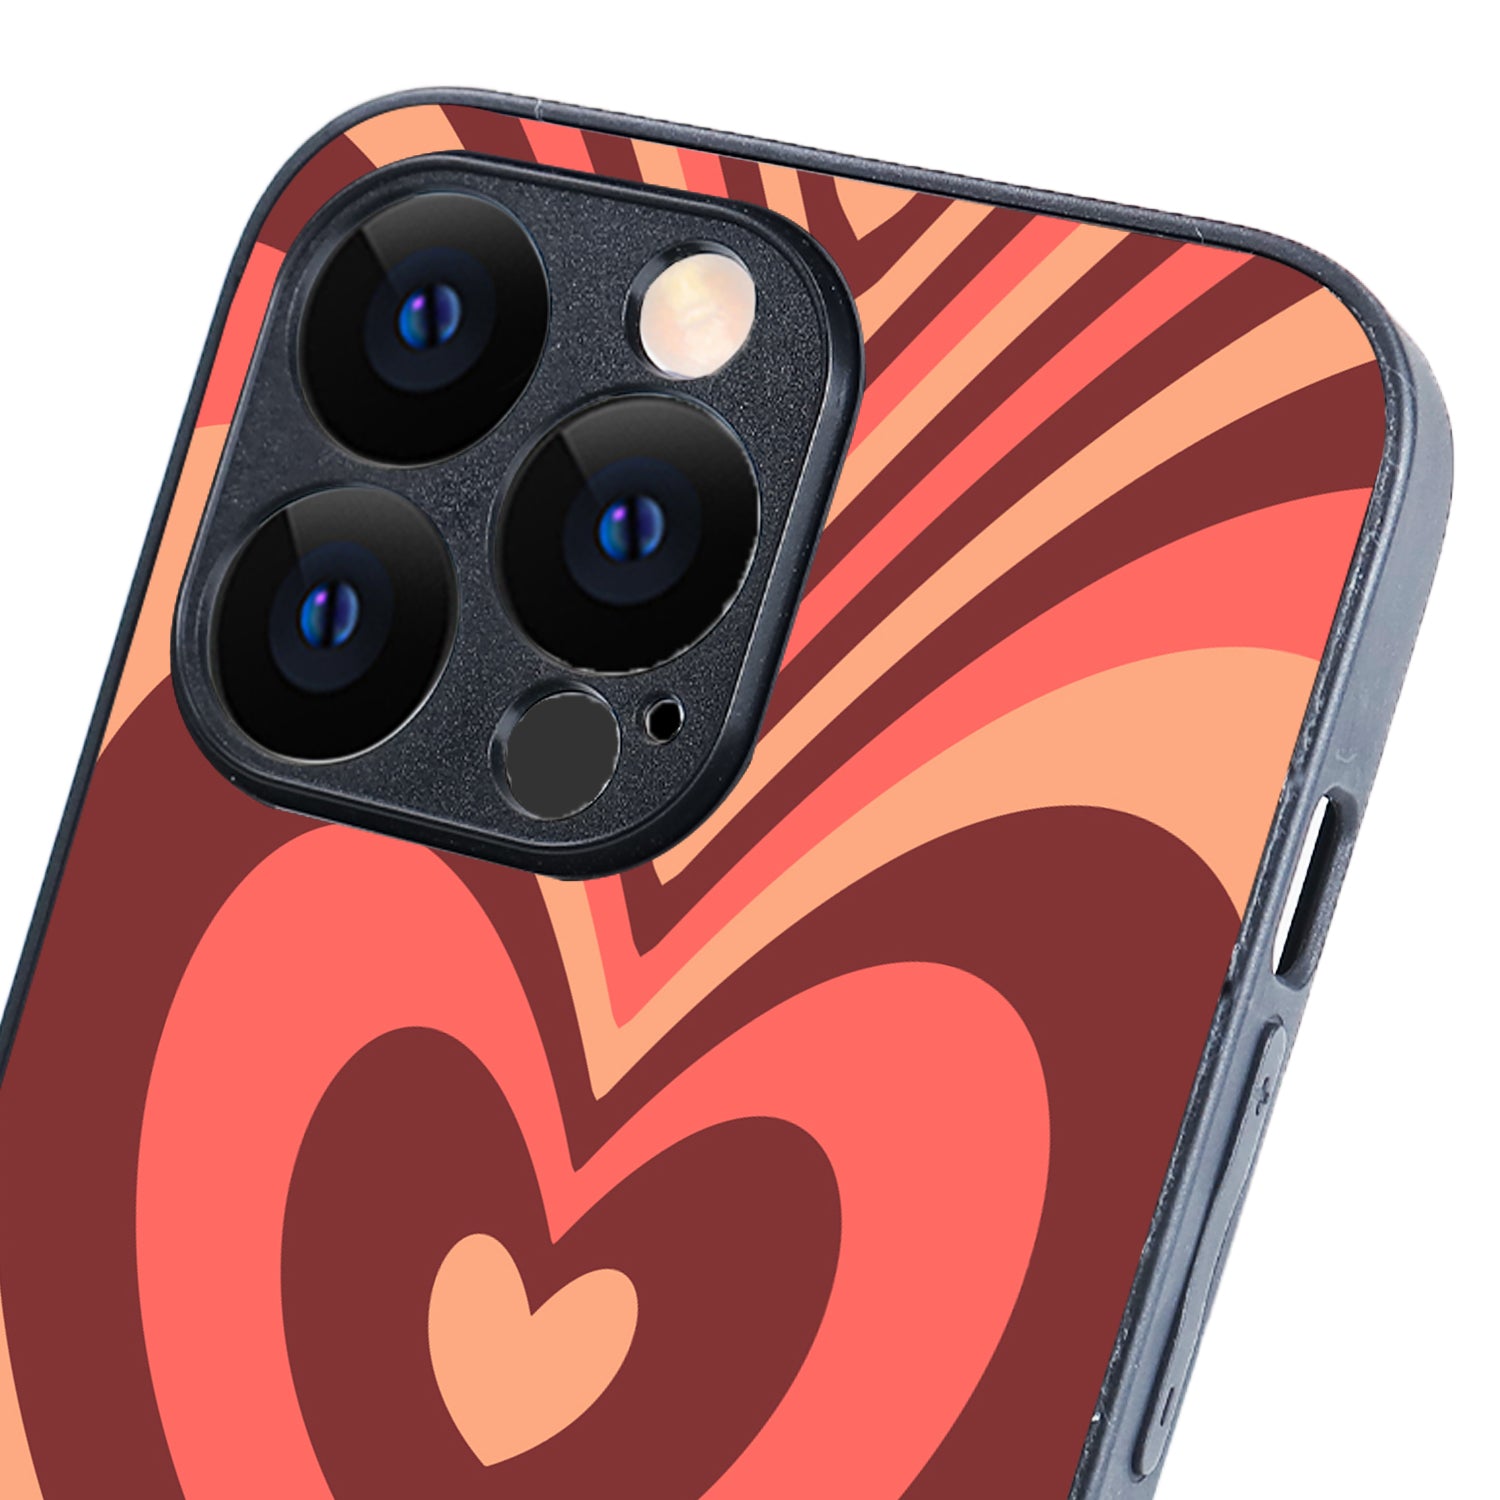 Red Heart Optical Illusion iPhone 13 Pro Case